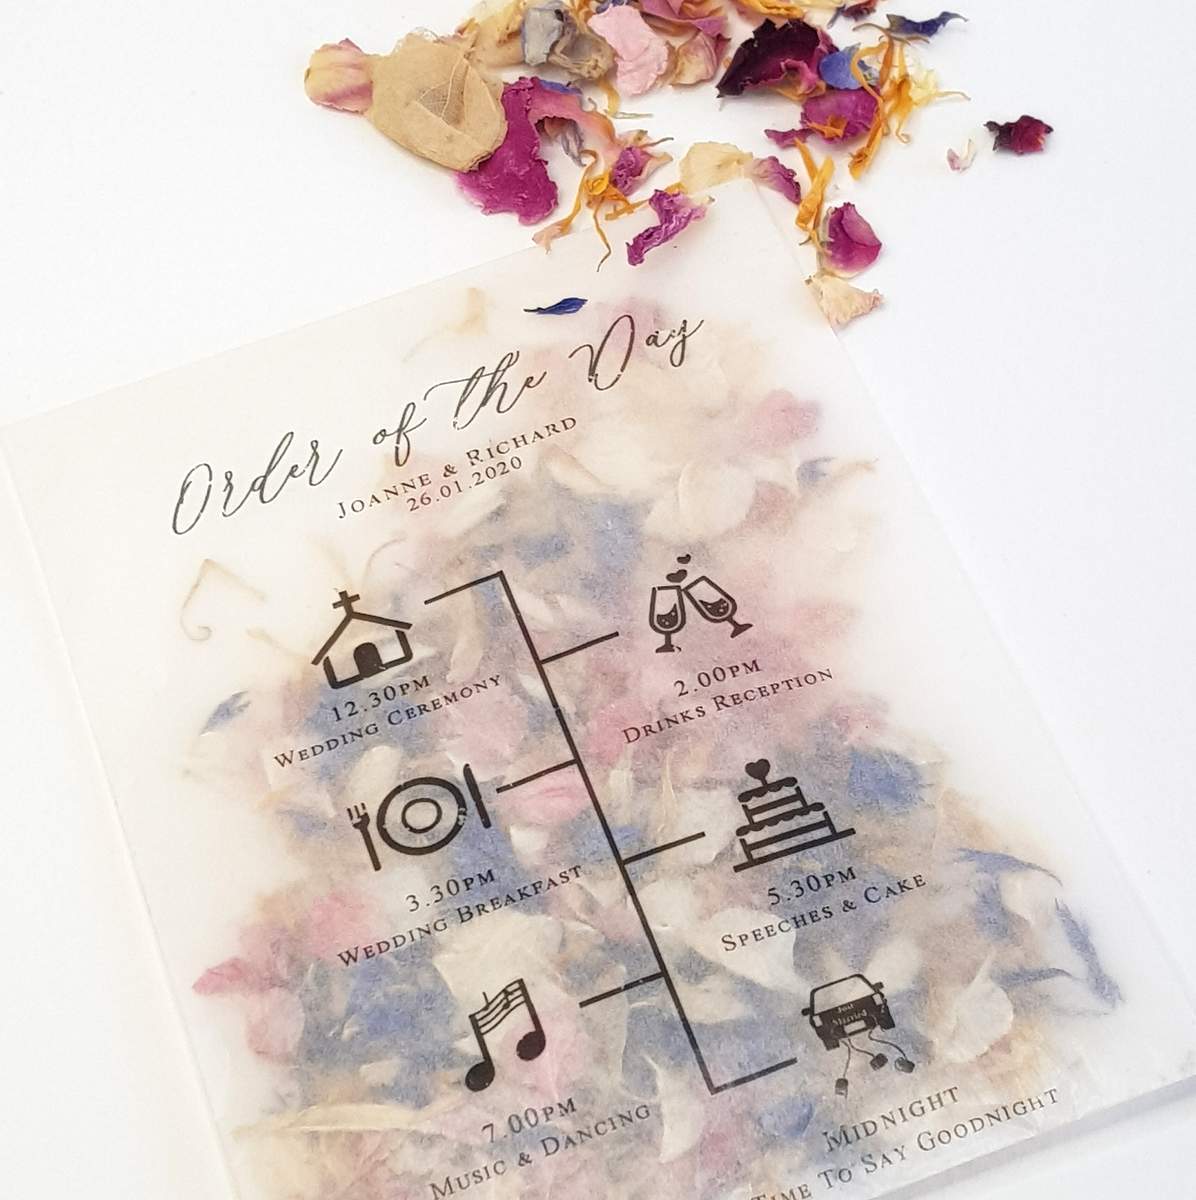 wedding confetti bag printed with an order of the day timeline